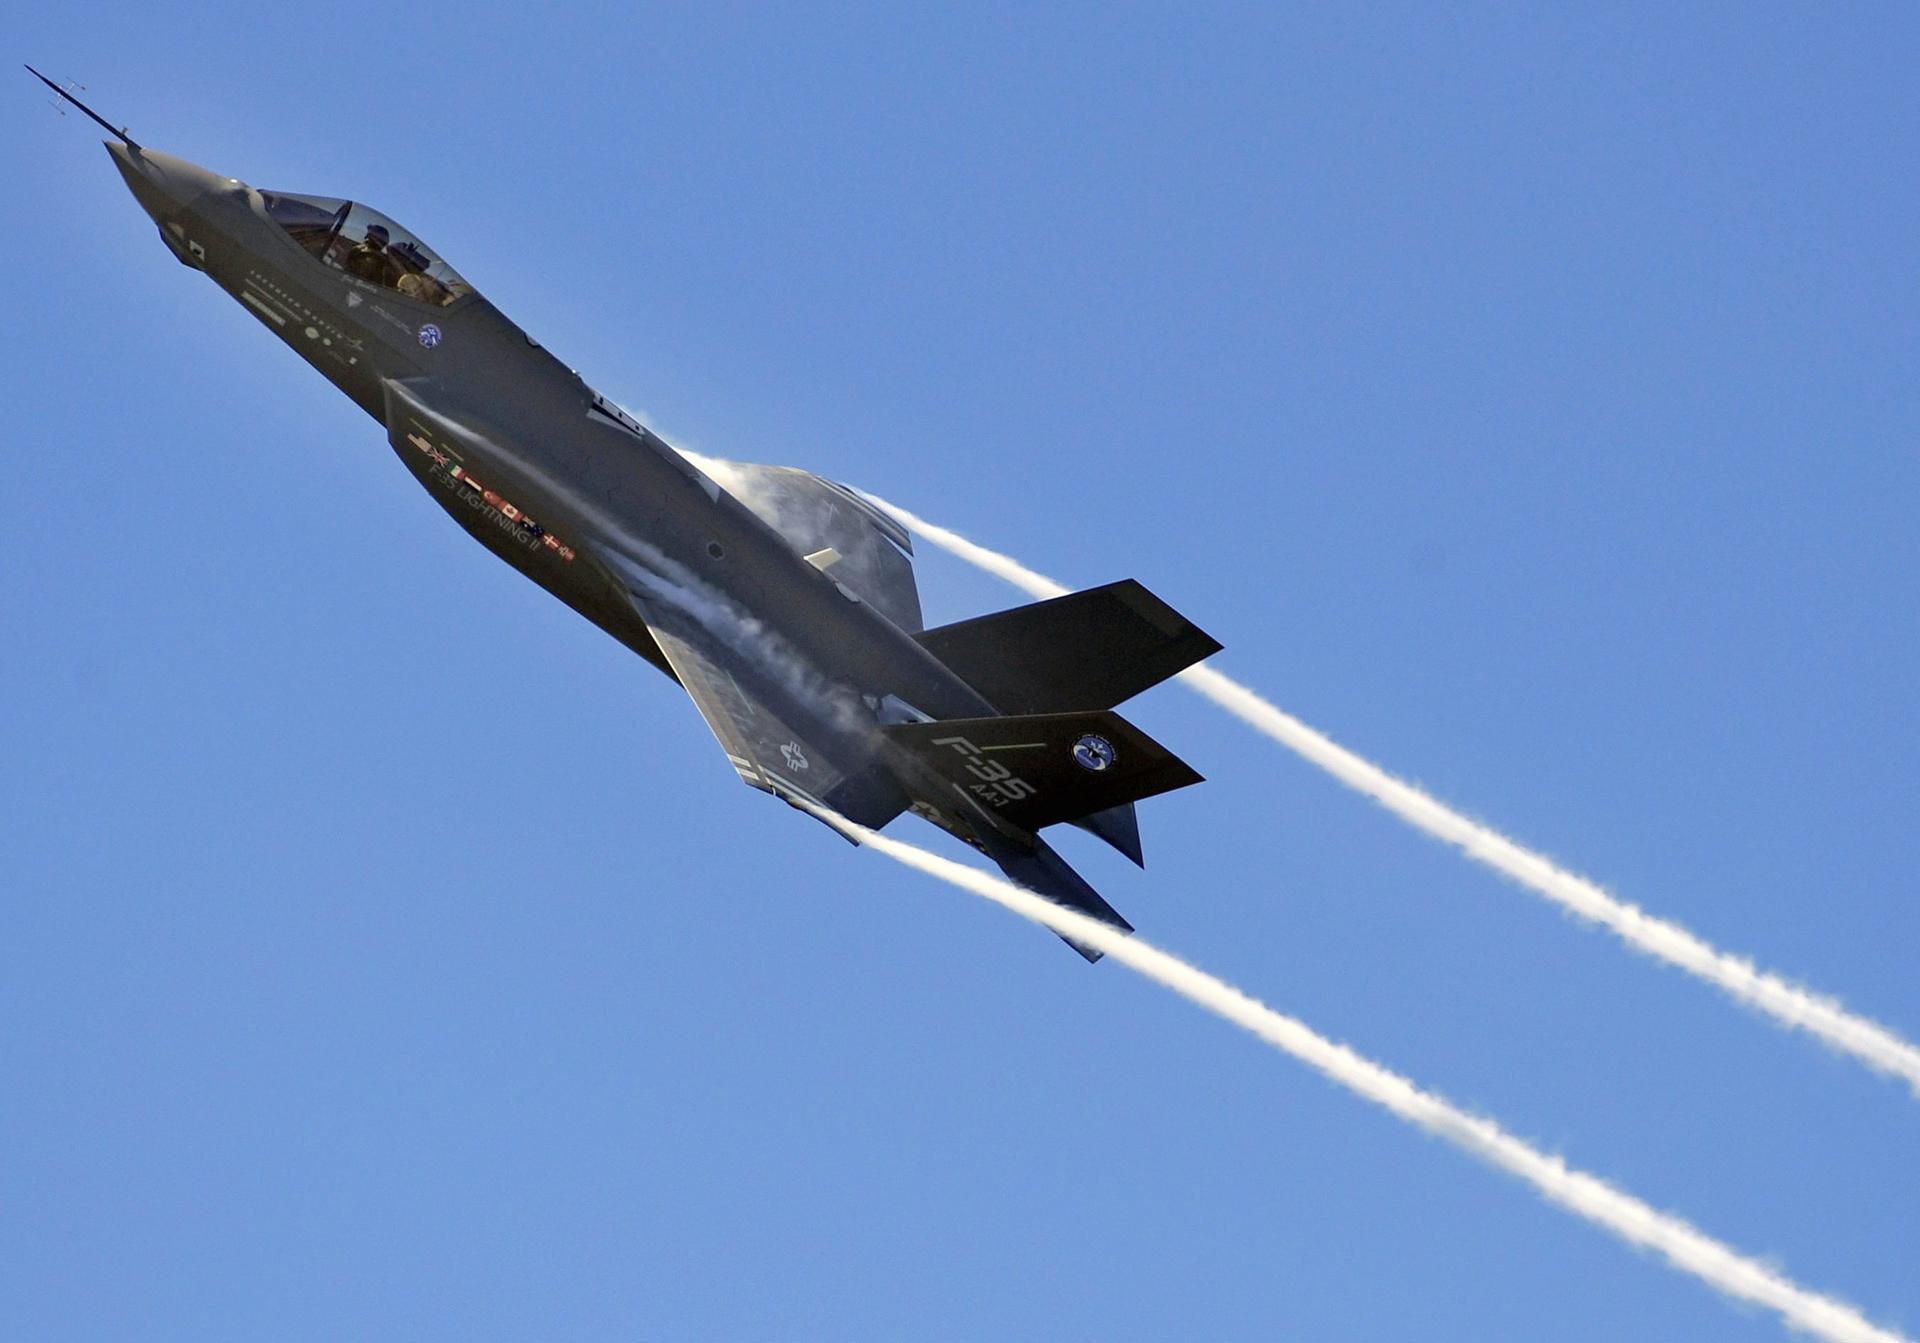 A handout file photo taken on 23 April 2009 and released by the US Air Force shows a F-35 Lightning II fighter jet flying over Eglin Air Force Base, in Florida, USA. EFE-EPA FILE/US AIR FORCE/HANDOUT HANDOUT EDITORIAL USE ONLY